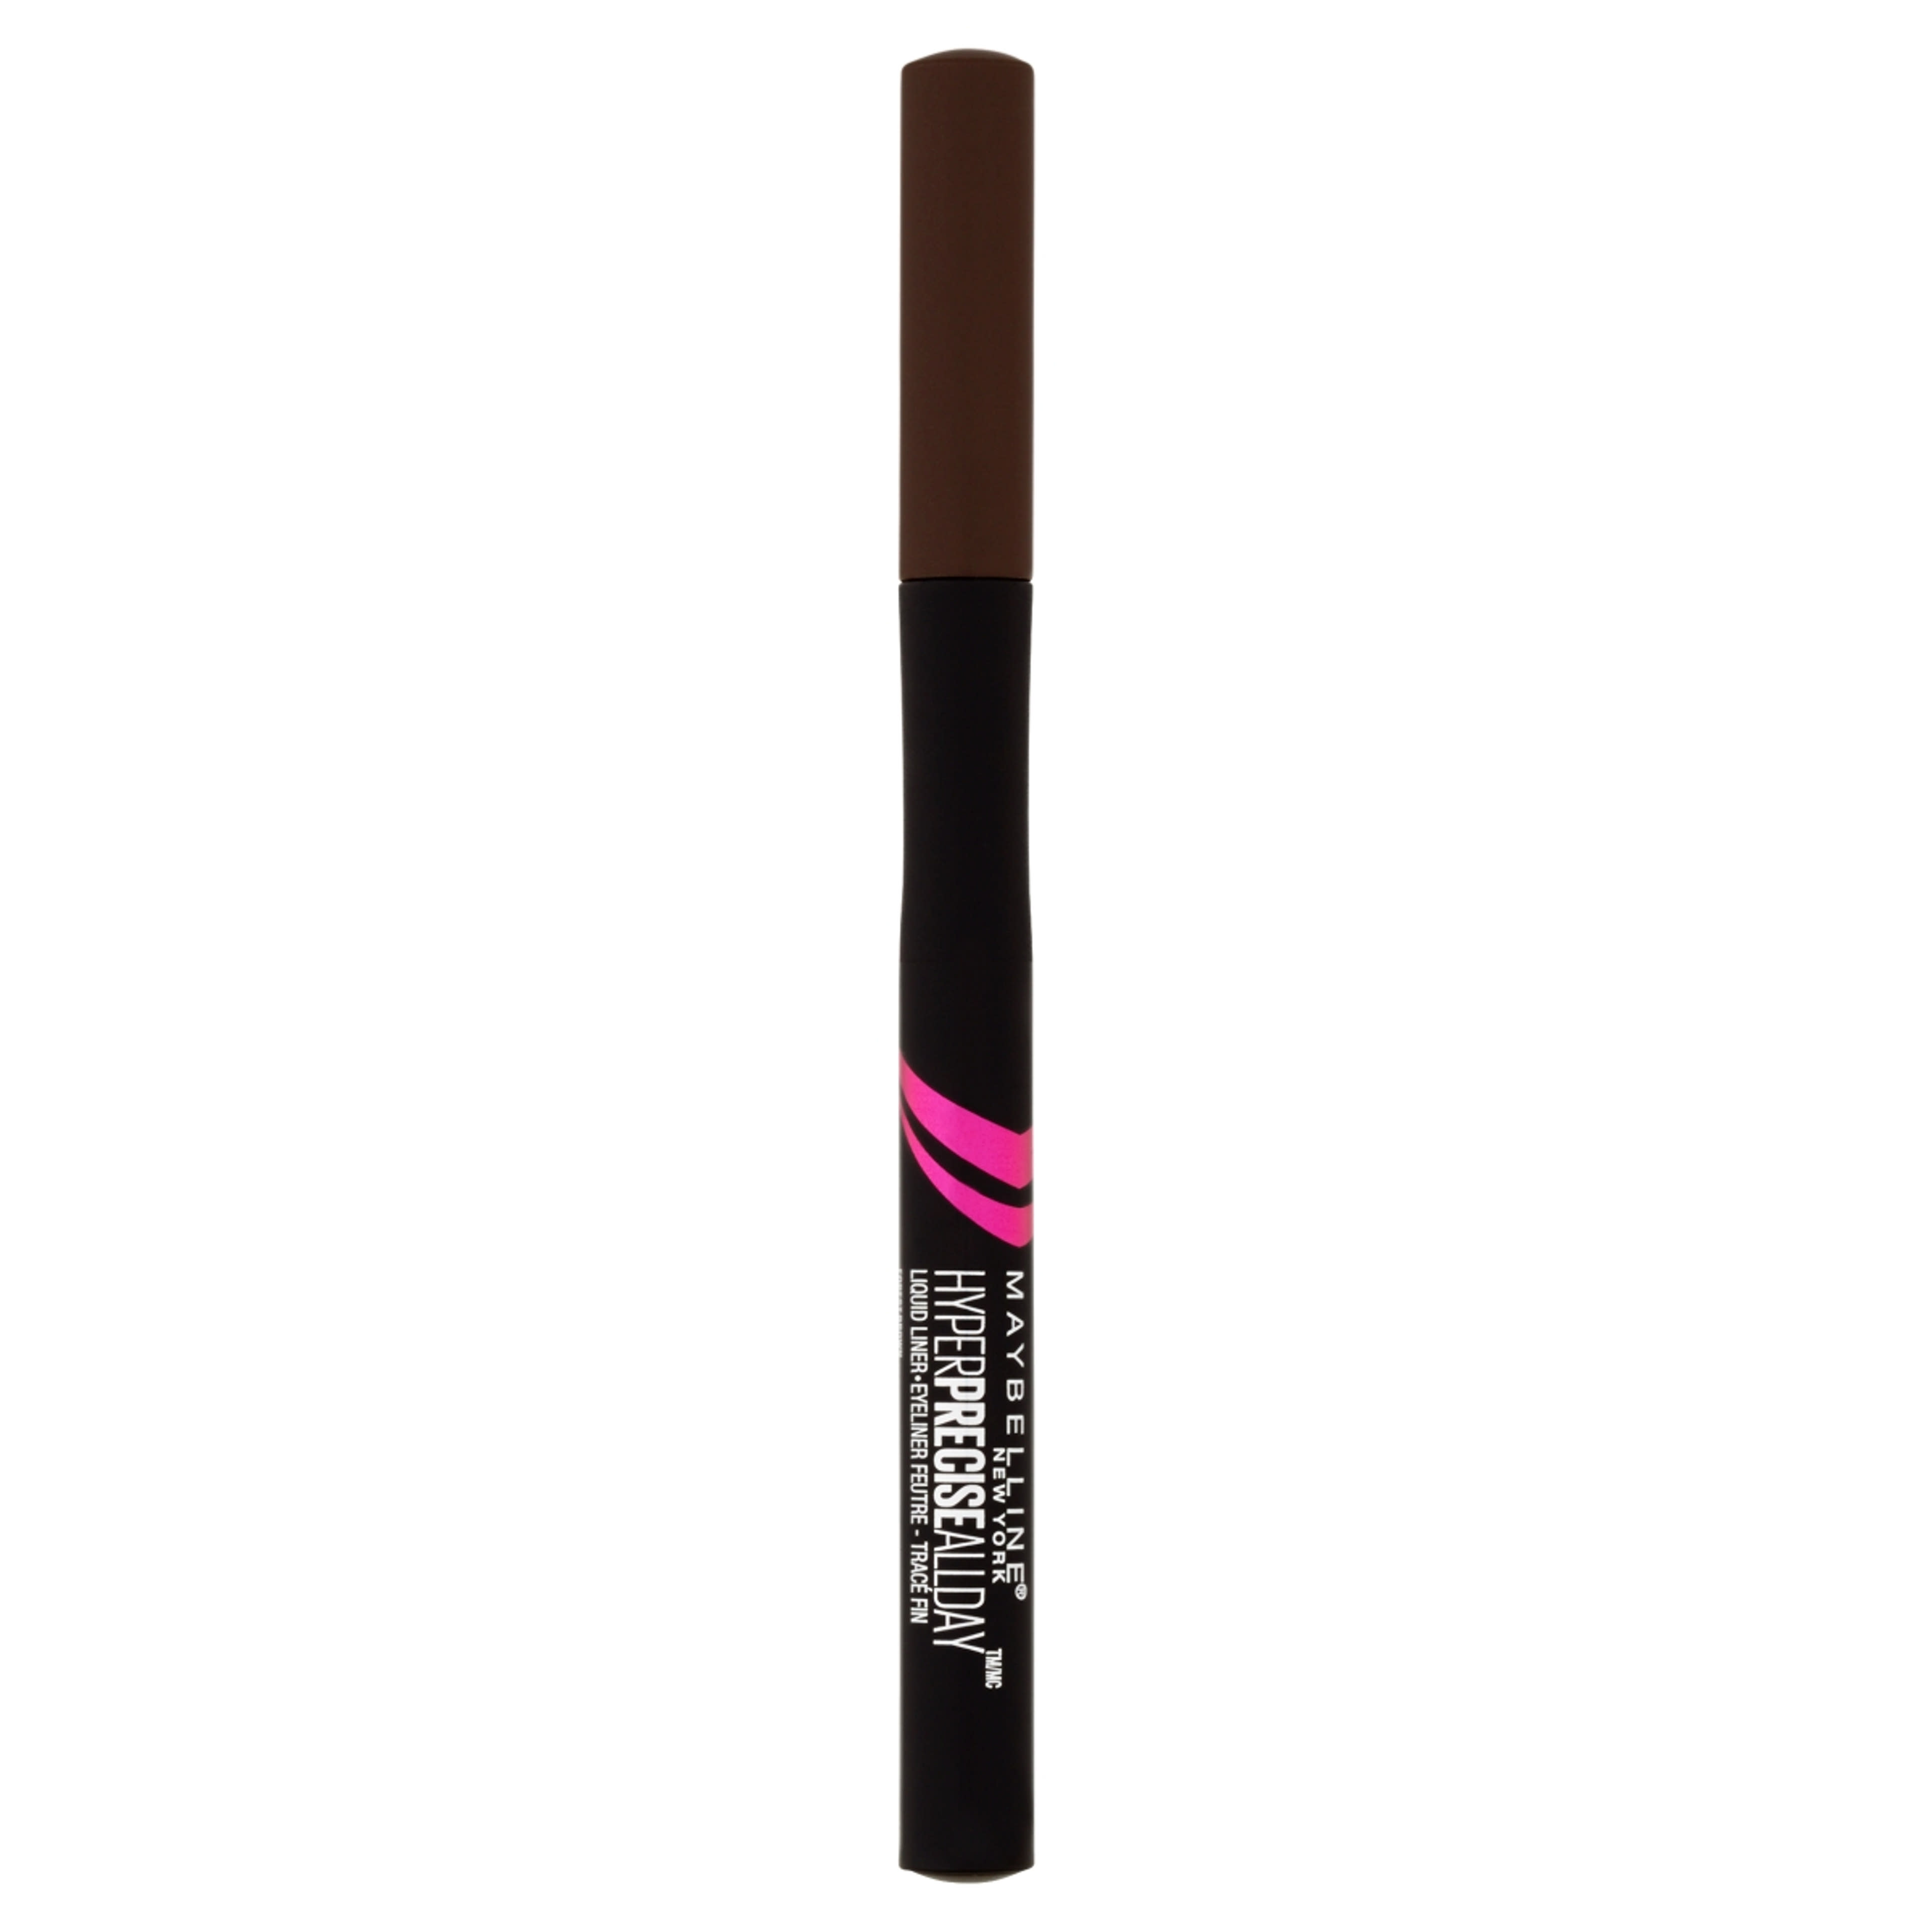 Maybelline Hyper Precise All Day szemhéjtus, Forest Brown - 1 db